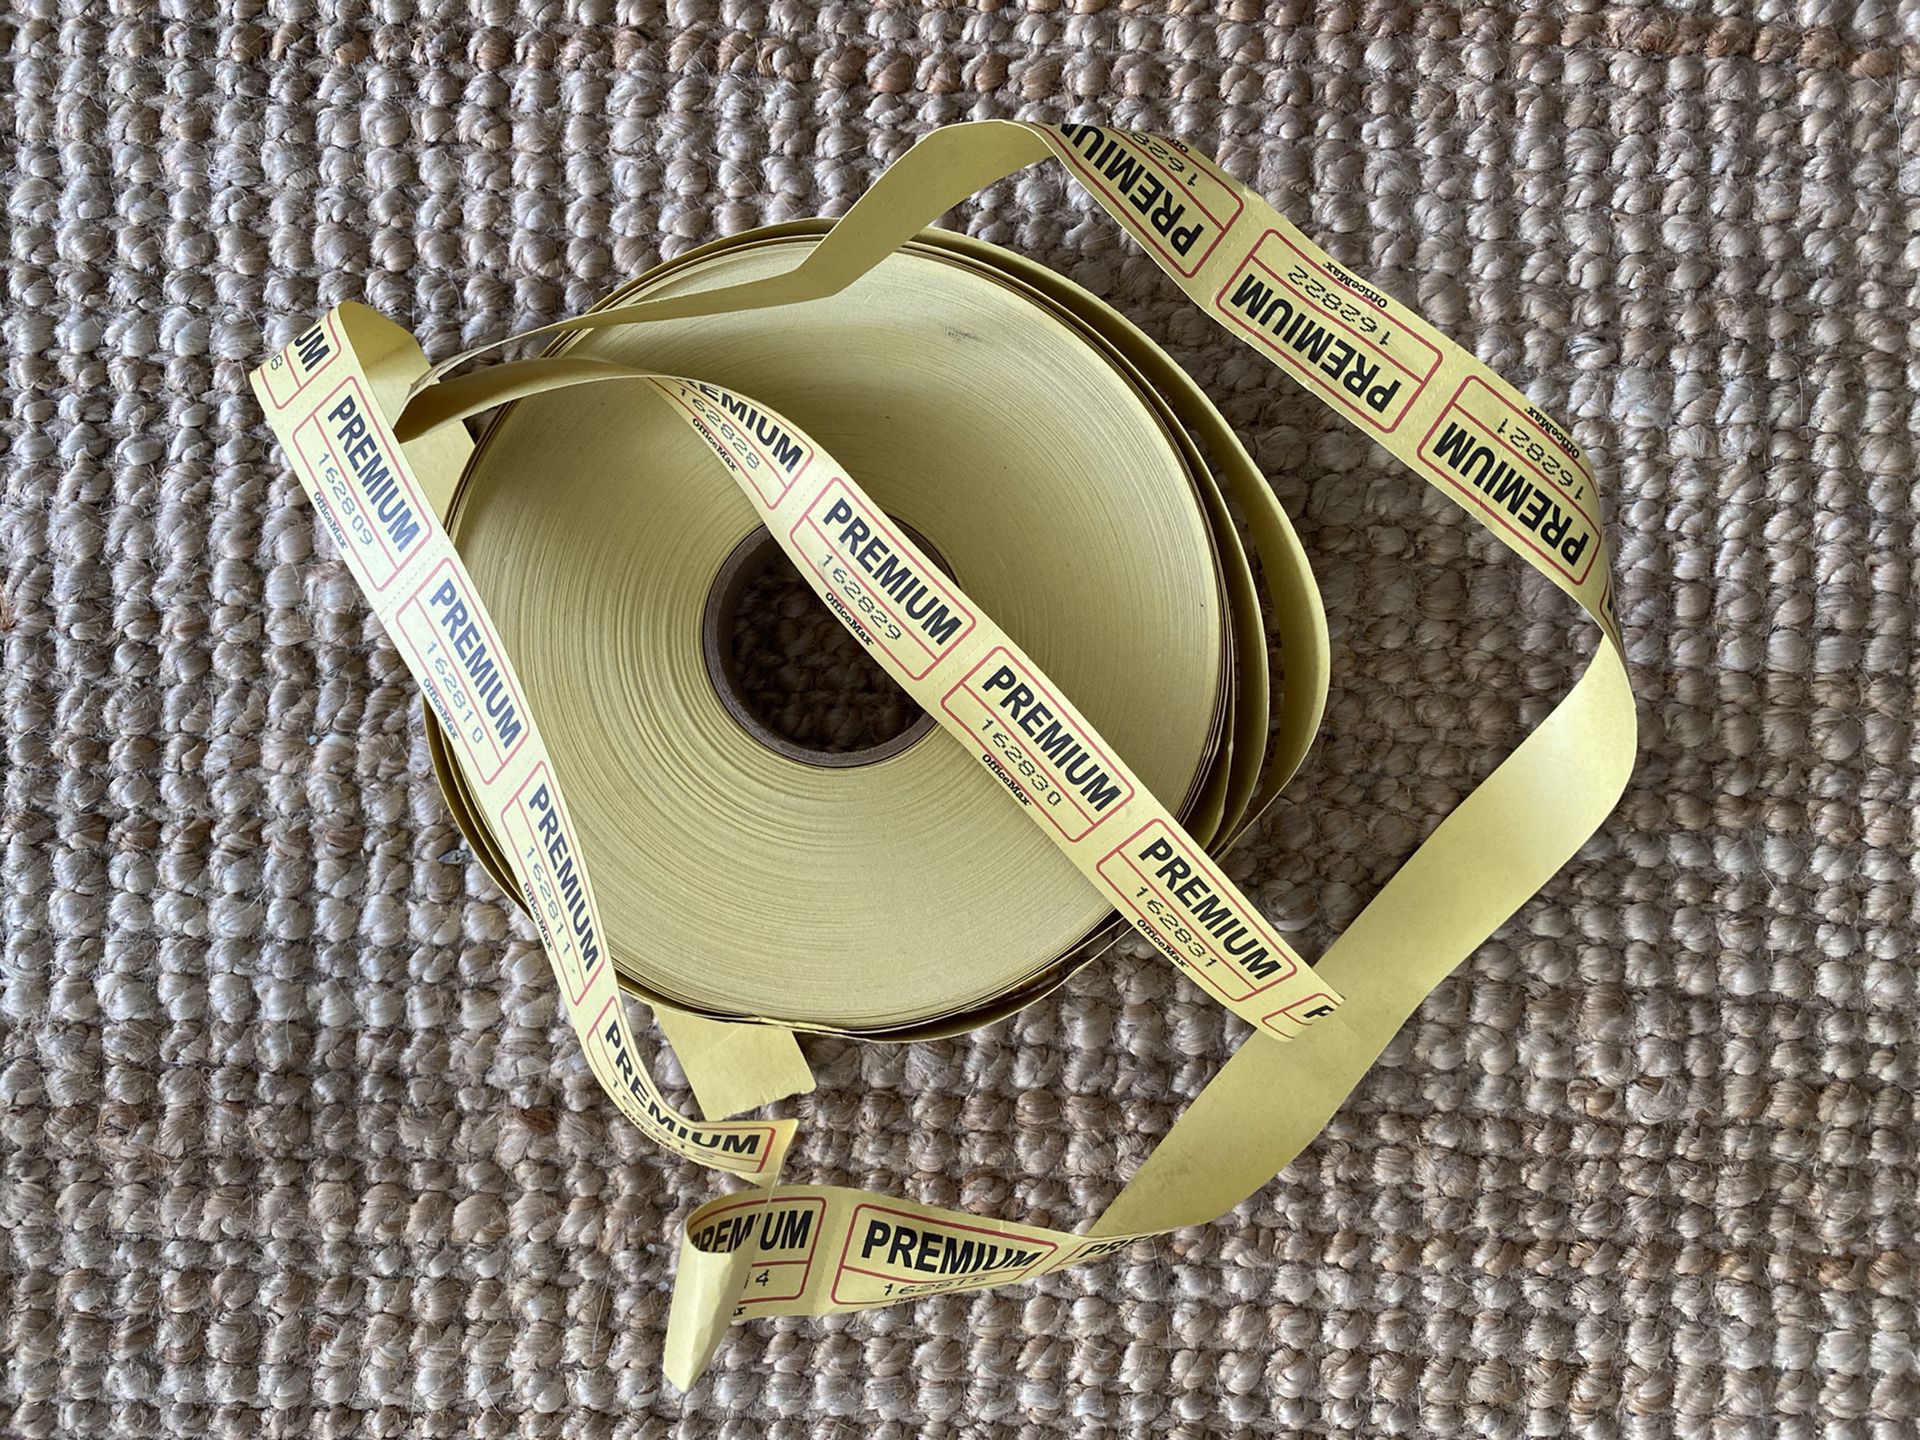 Spool of numbered Premium Tickets (yellow)